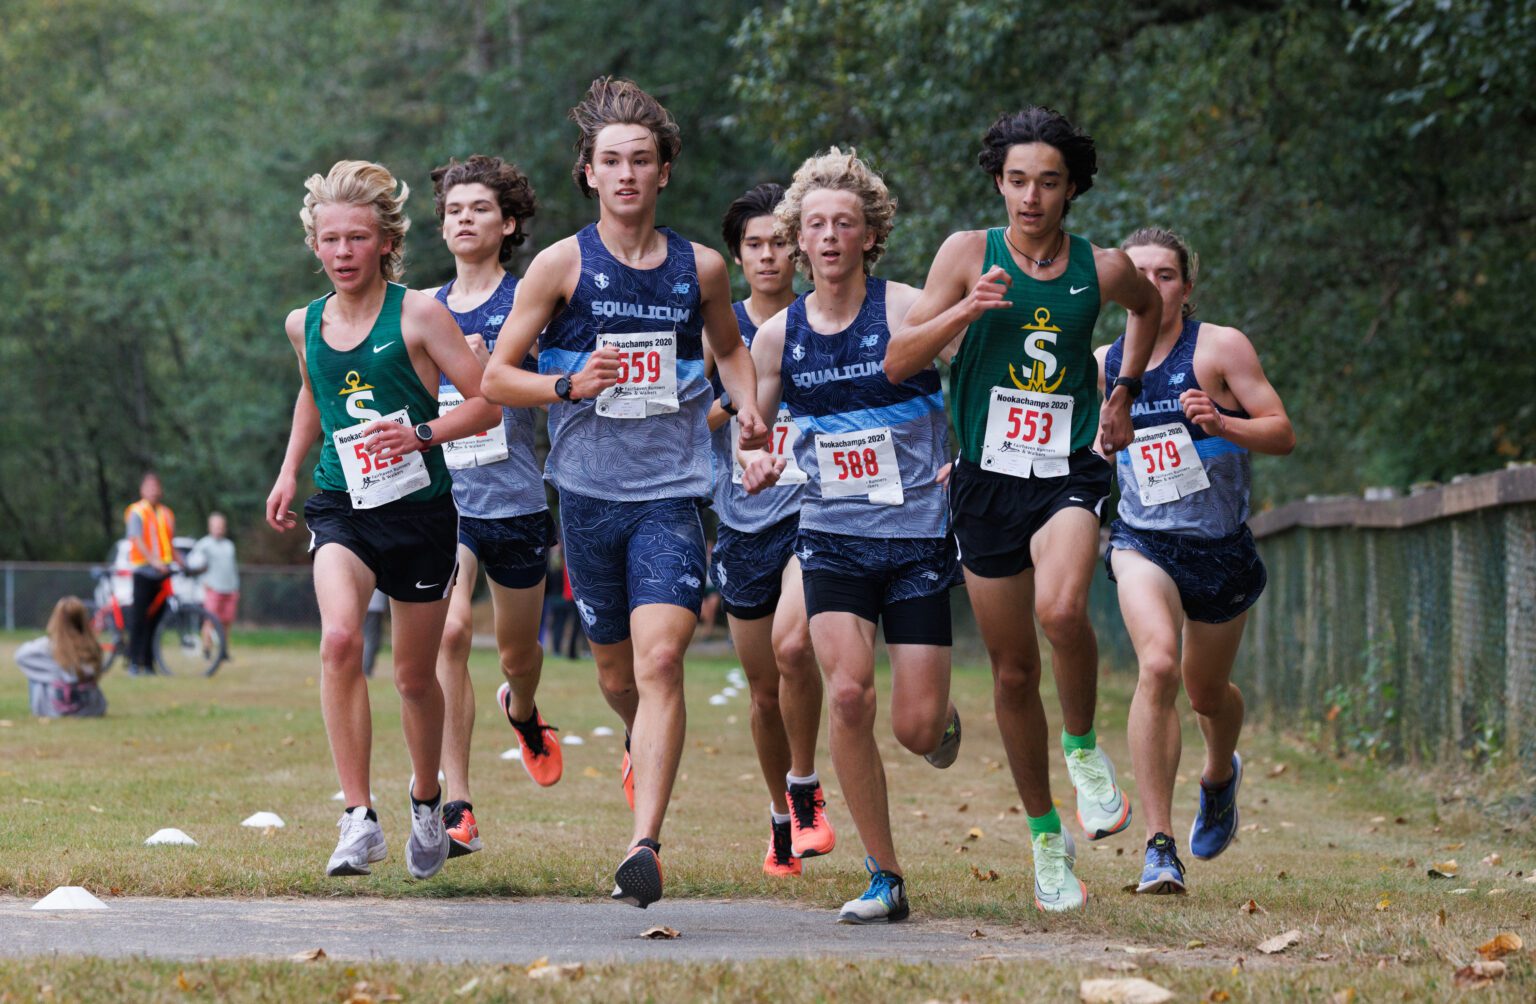 The Squalicum boys team race as a pack against Sehome and Bellingham during  a cross country race at Lake Padden on Sept. 28.